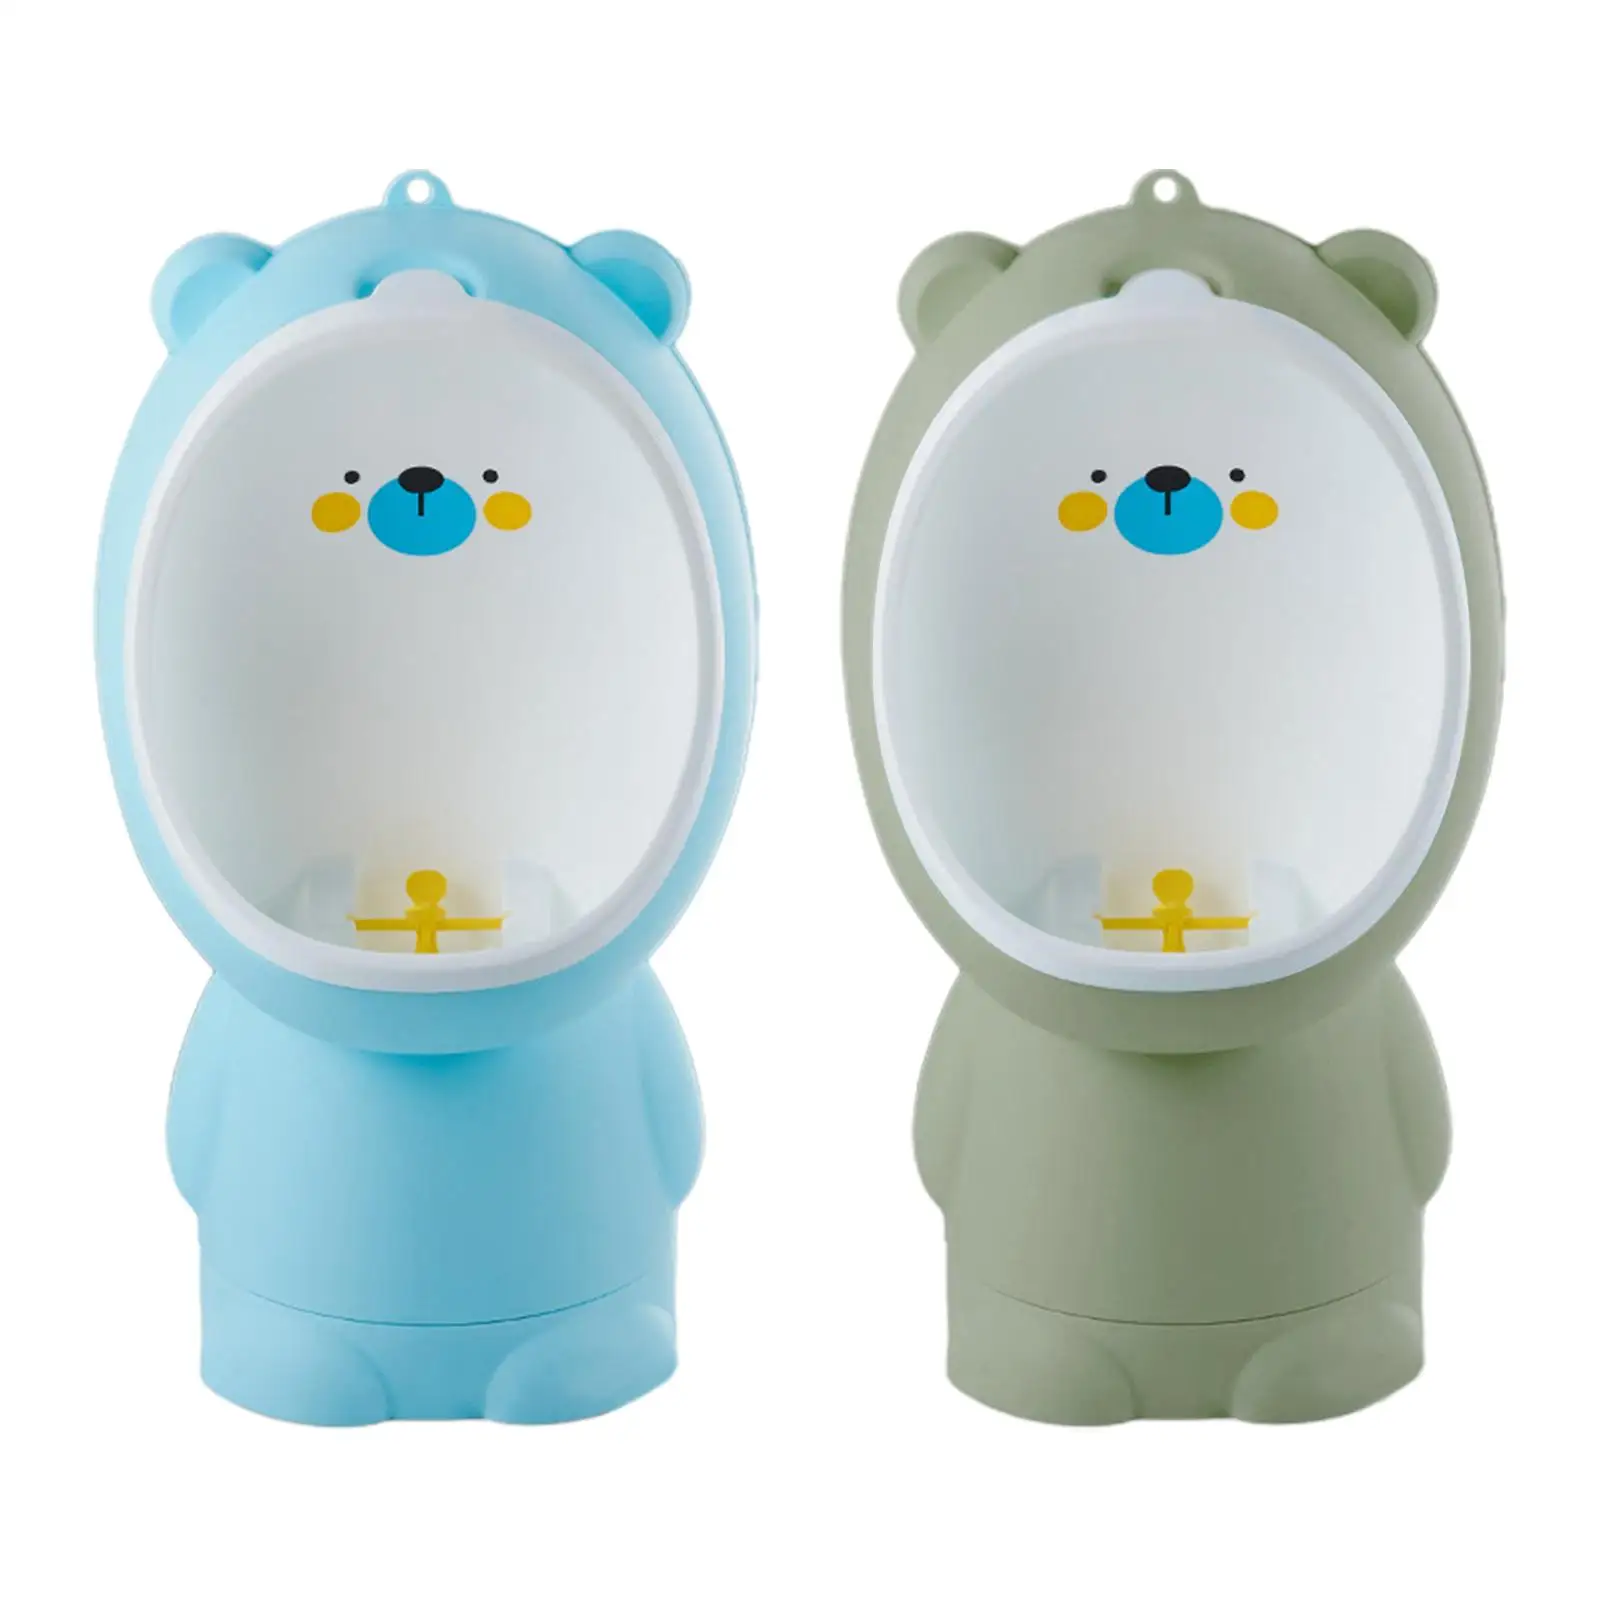 Standing Potty Cute Bear Potty Trainer Urinal Urinal Pee Trainer Wall Mounted for Kids Toddlers Child Boys Baby